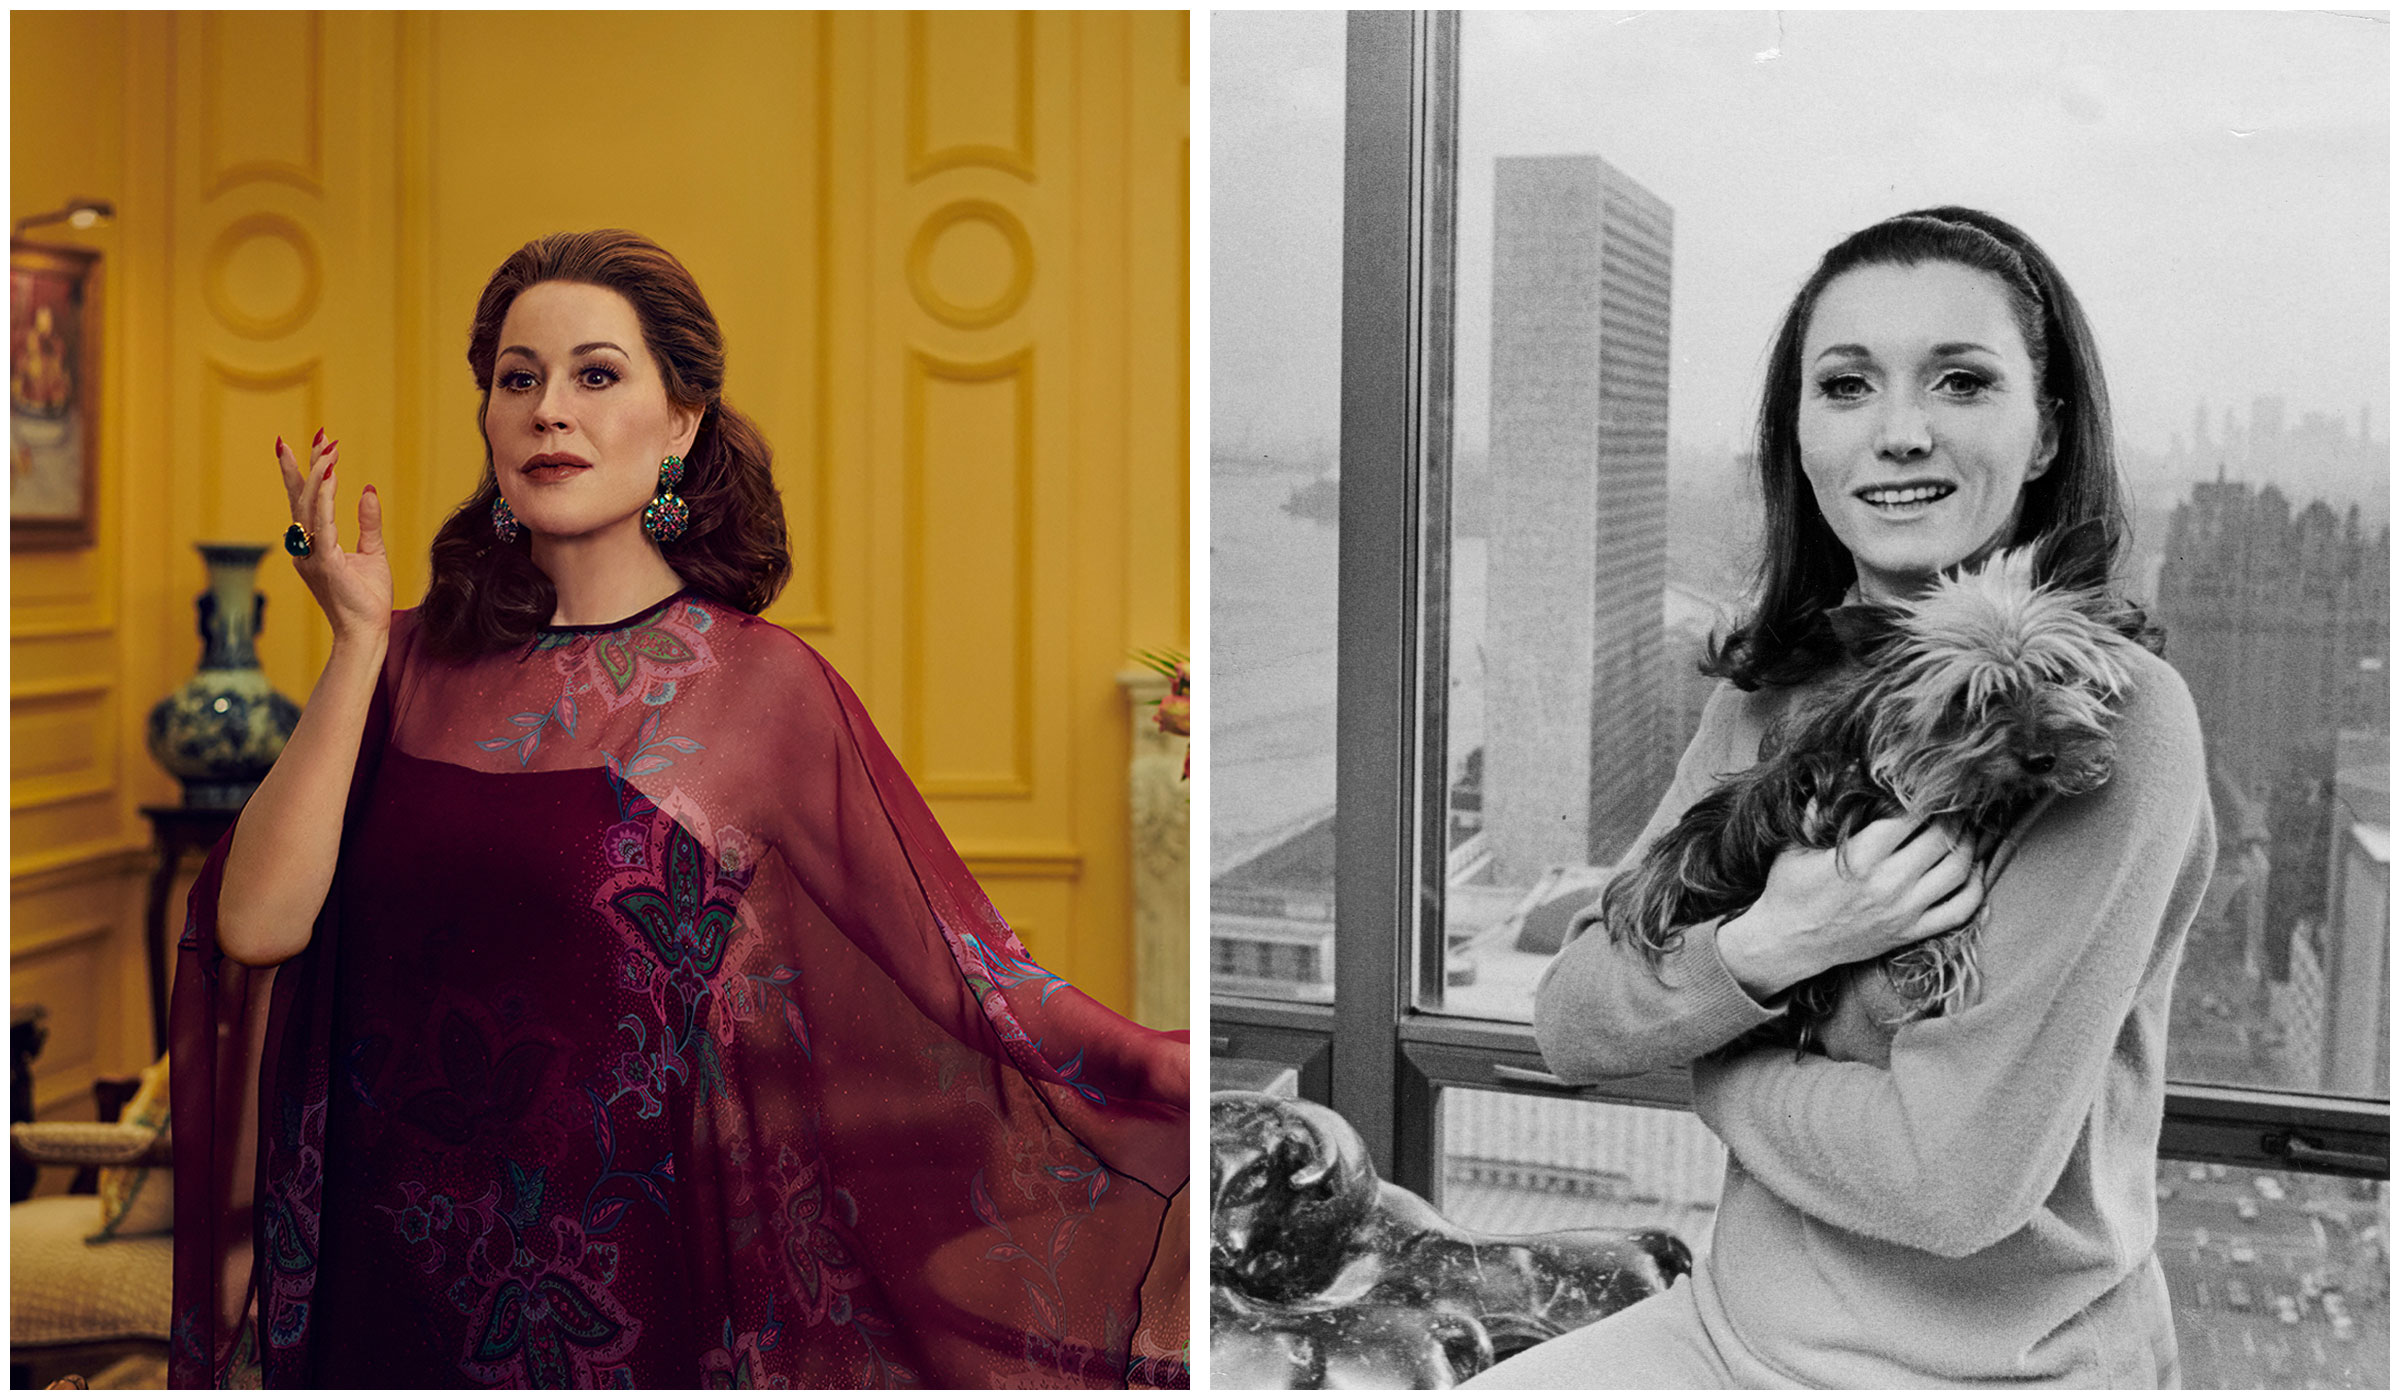 diptych of Molly Ringwald as Joanne Carson and Joanne Carson